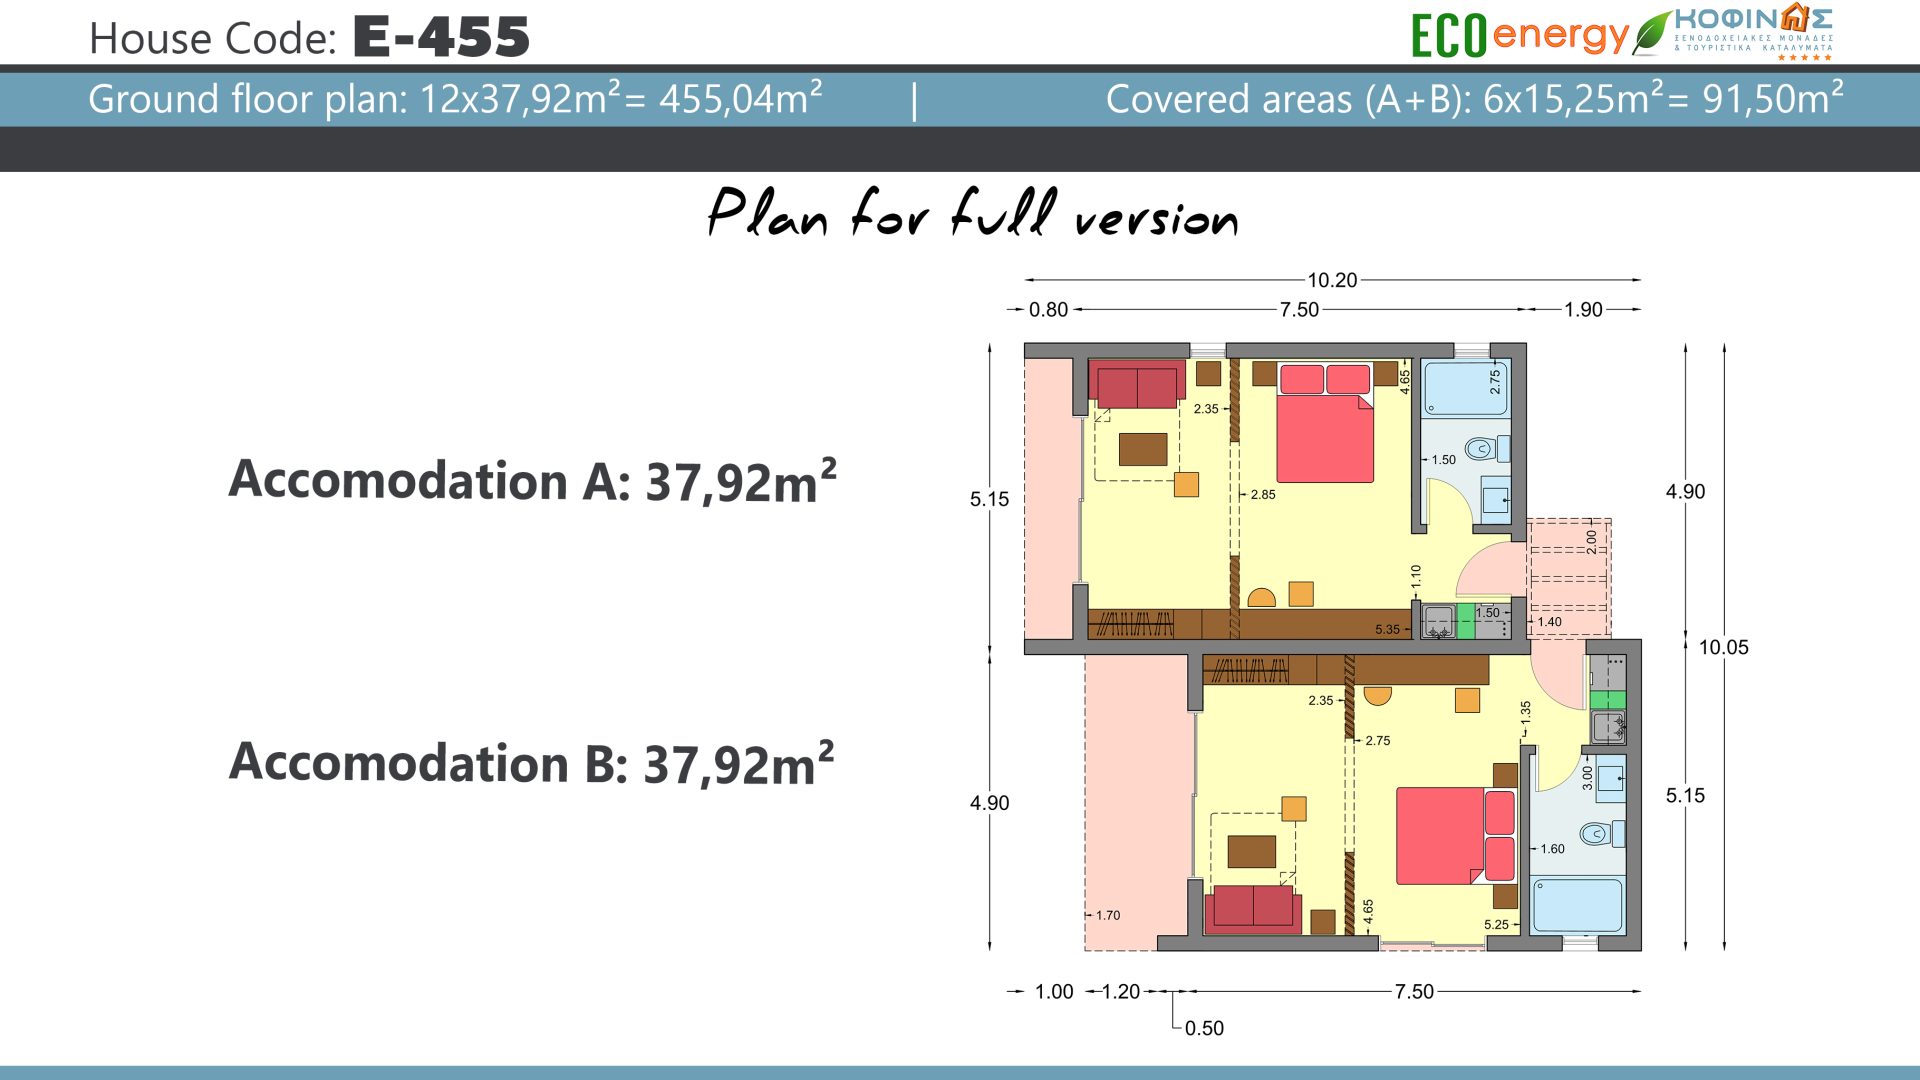 House complex E-455, total surface of 12 x 37,92 = 455,04 m²,covered areas 95,50 m²